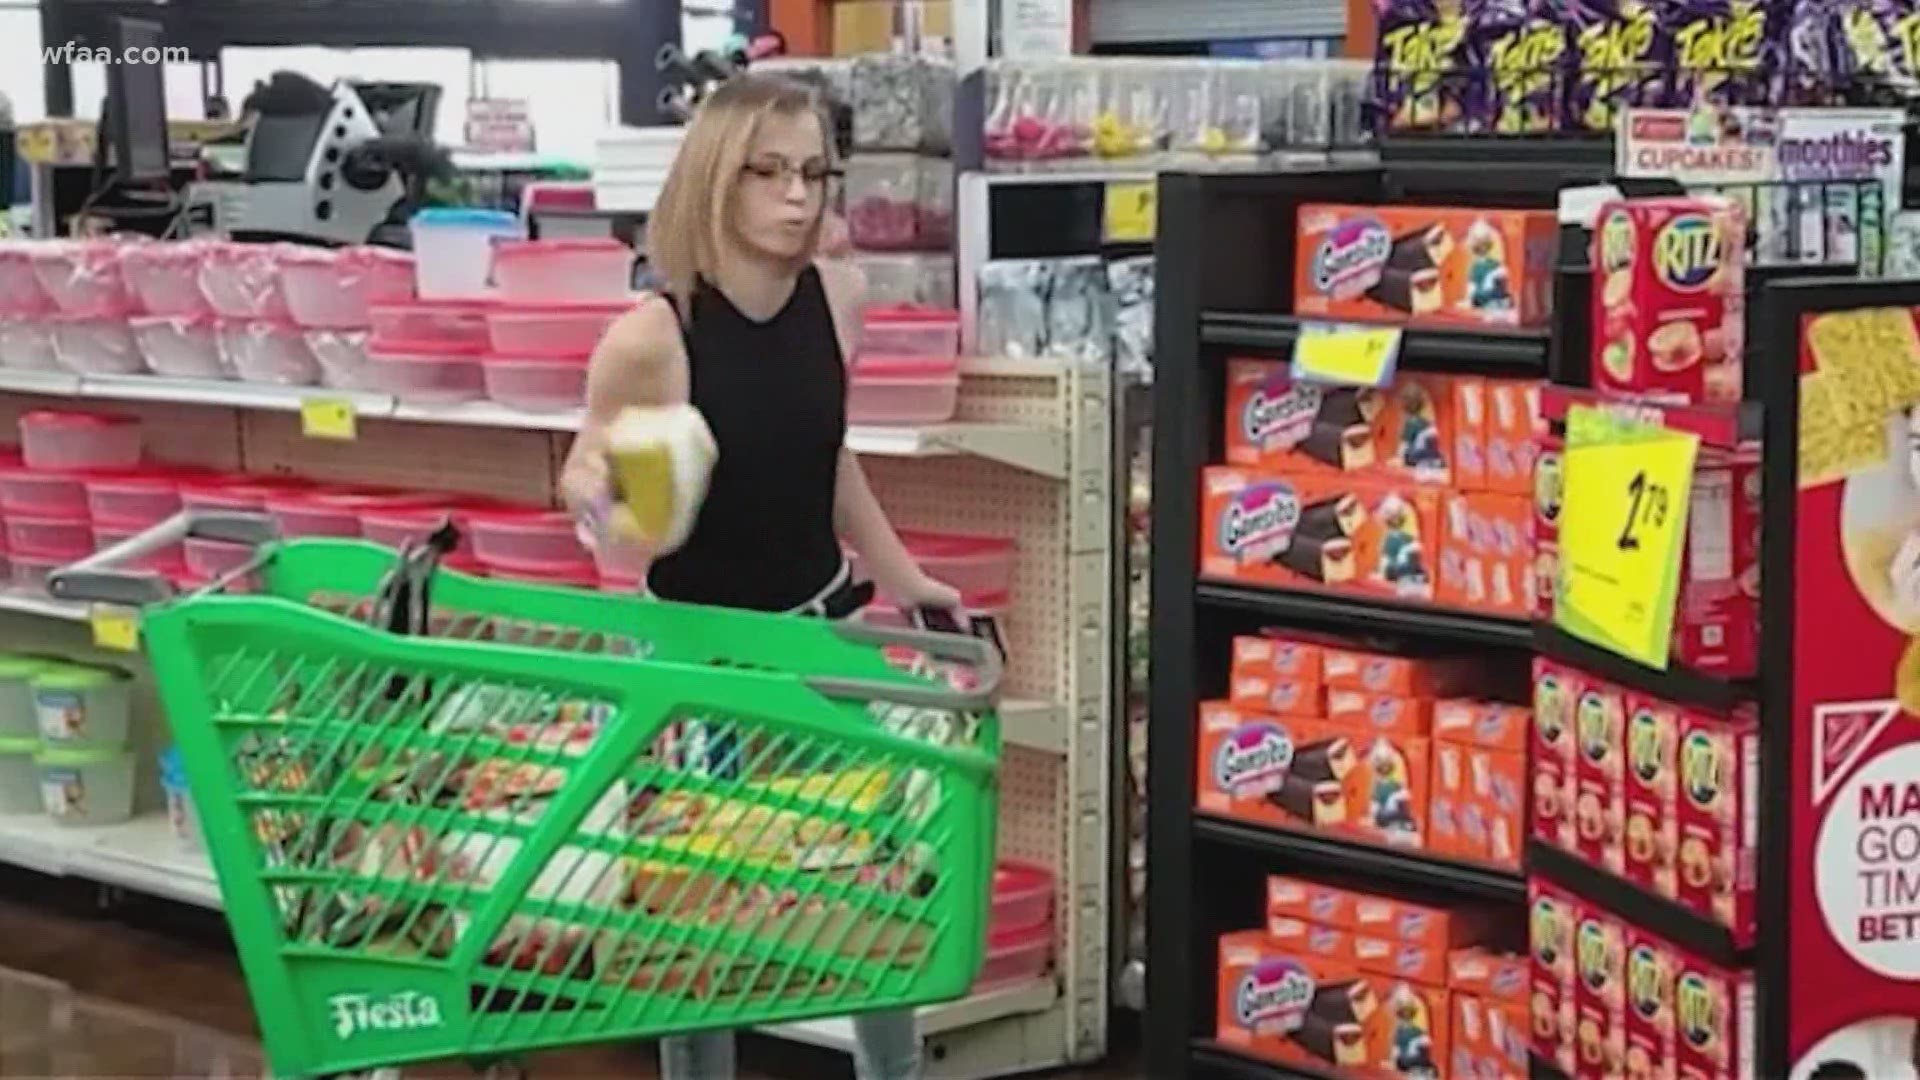 The unidentified woman shouts profanities and tosses food from her shopping cart over being asked to wear a mask in a Fiesta grocery store.